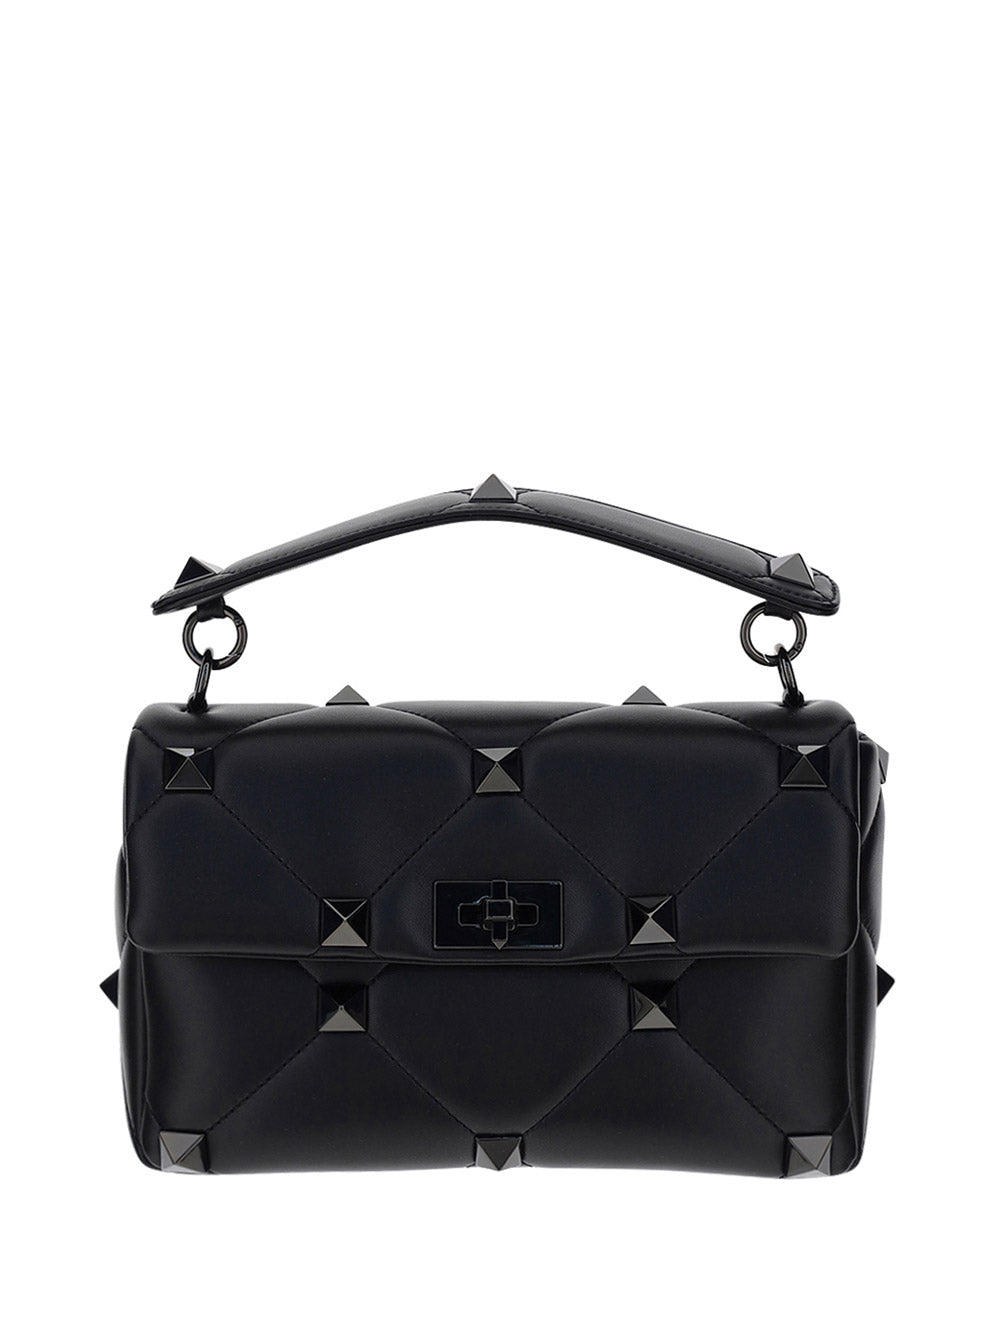 Large Roman Stud Shoulder Bag in Nappa with Chain and Tone-on-tone Studs - Black